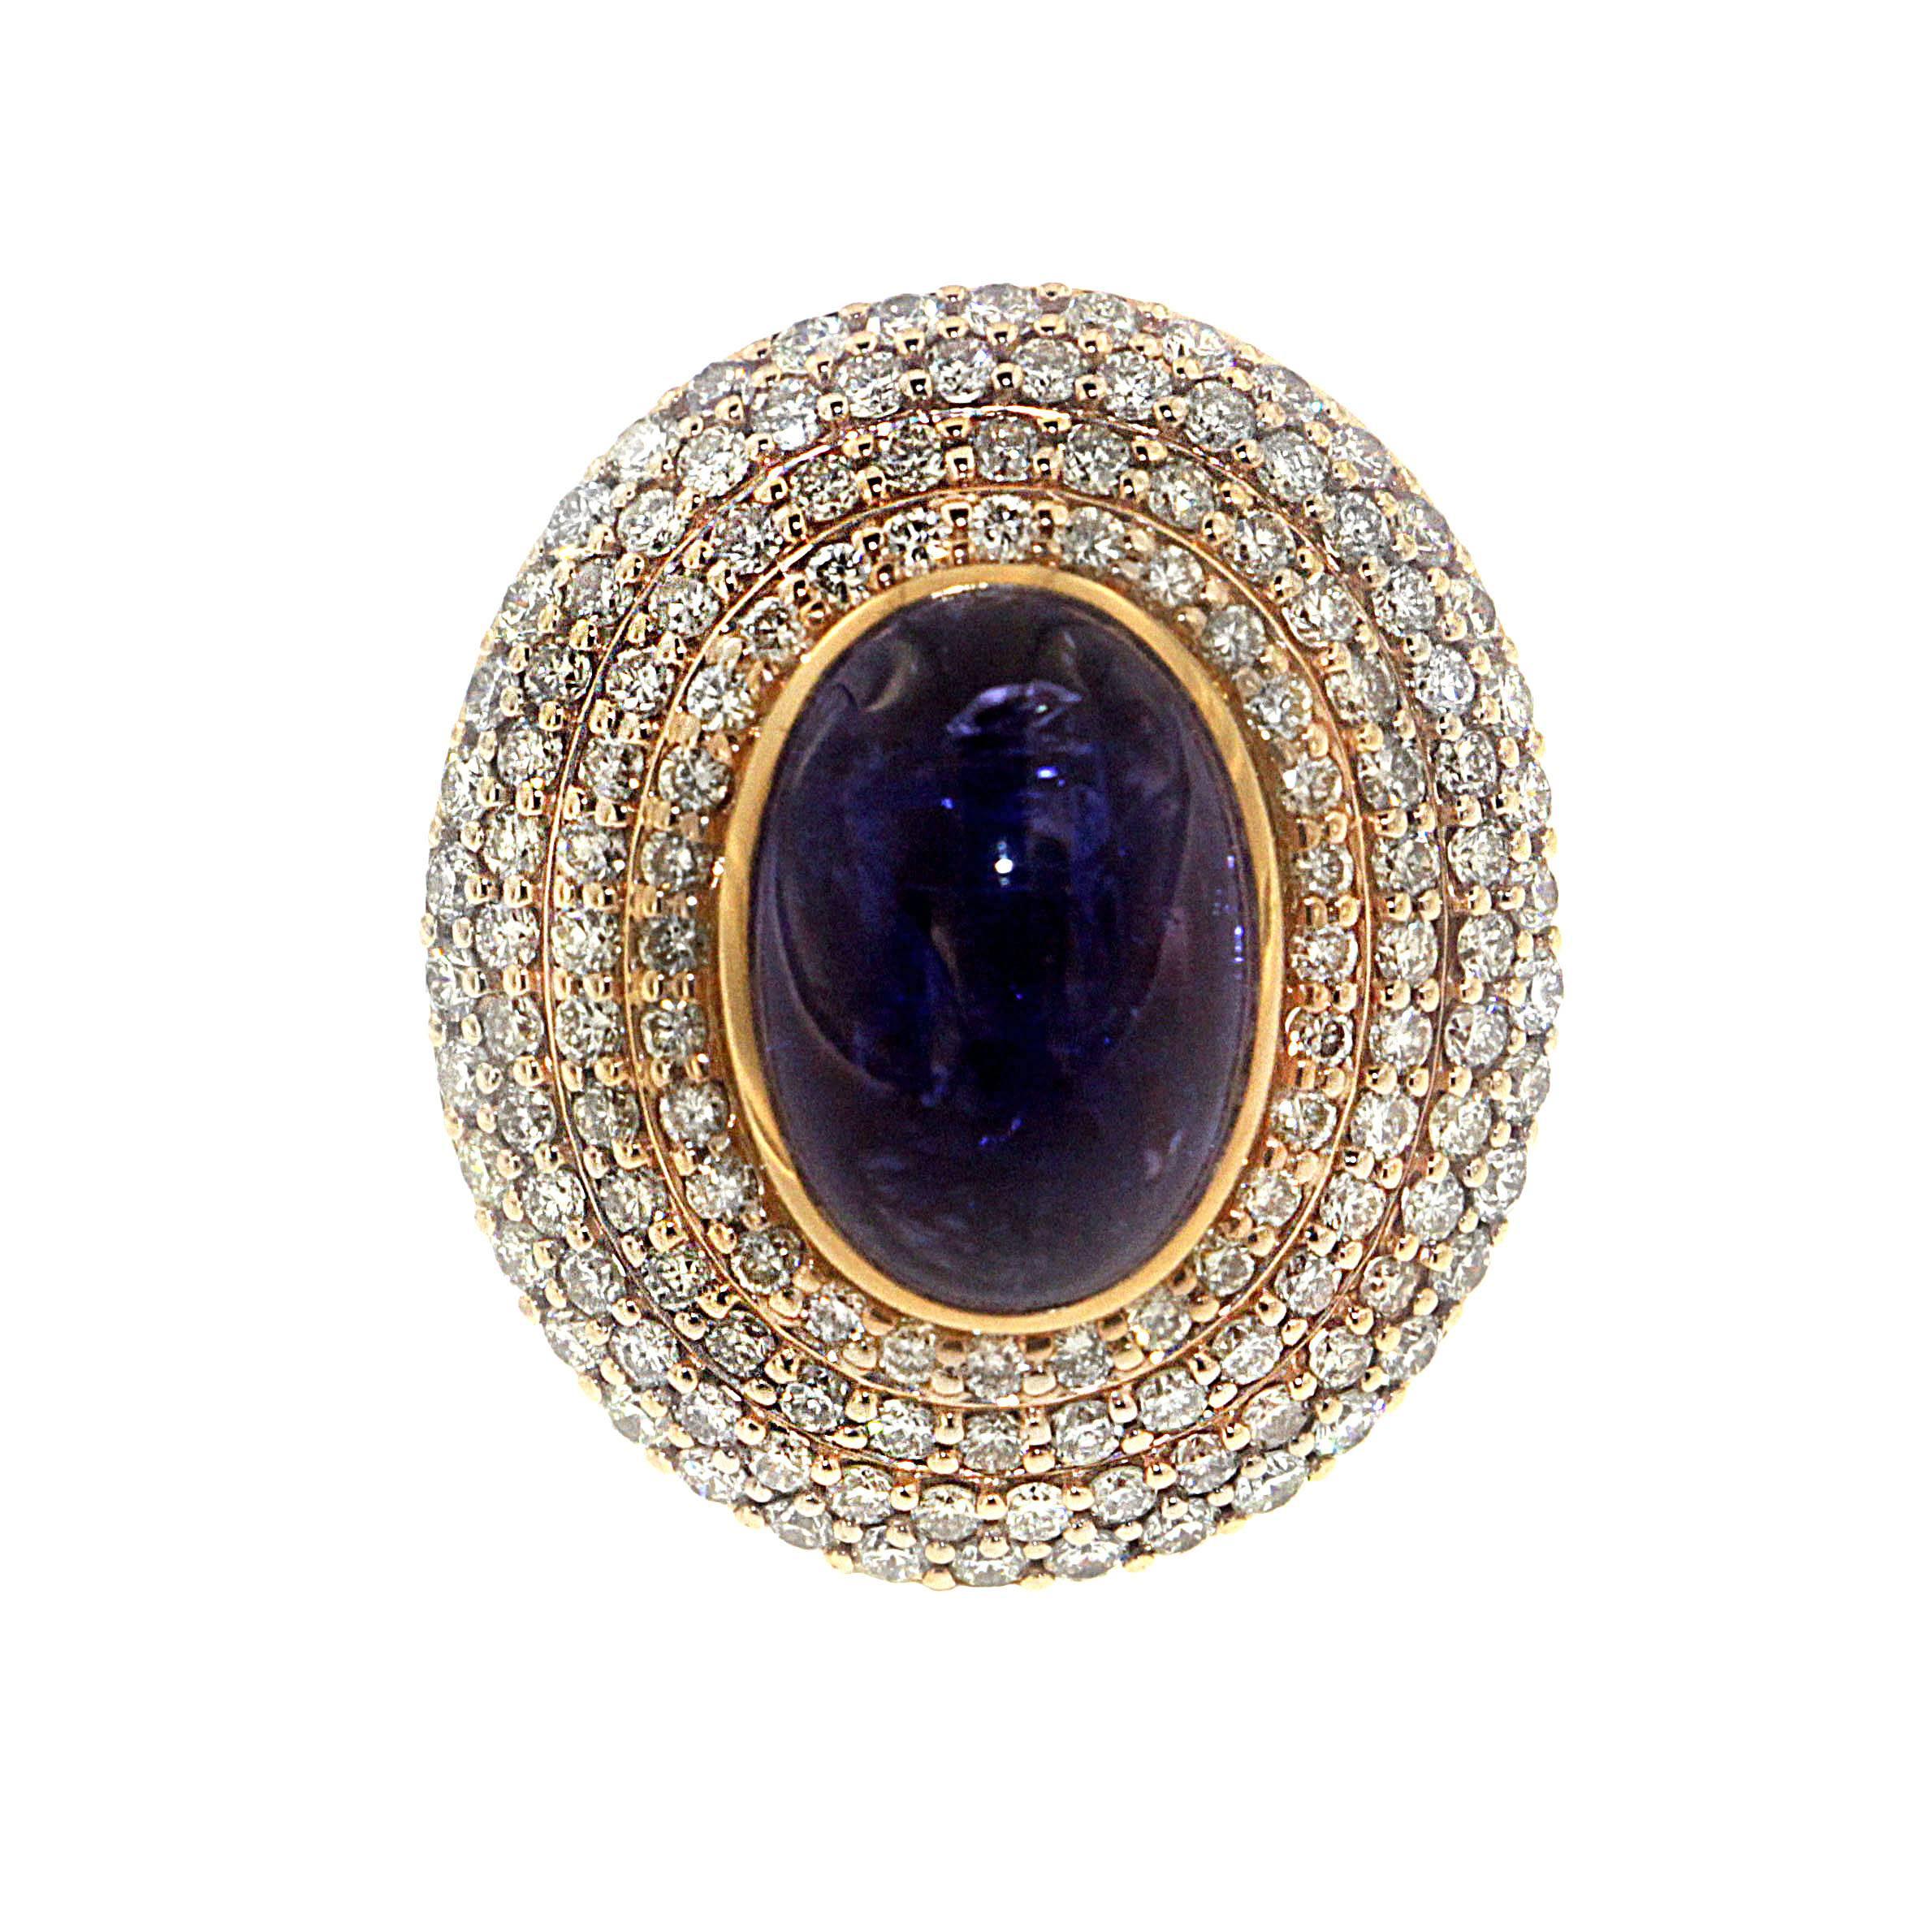 The aesthetic of the Celestra ring, a Zorab Creation, is as worldly as it is ethereal.

9.25 carats of deep blue-violet cabochon tanzanite are encircled by four tiers of brilliant white diamonds, totaling 2.43 carats and worthy of the most romantic